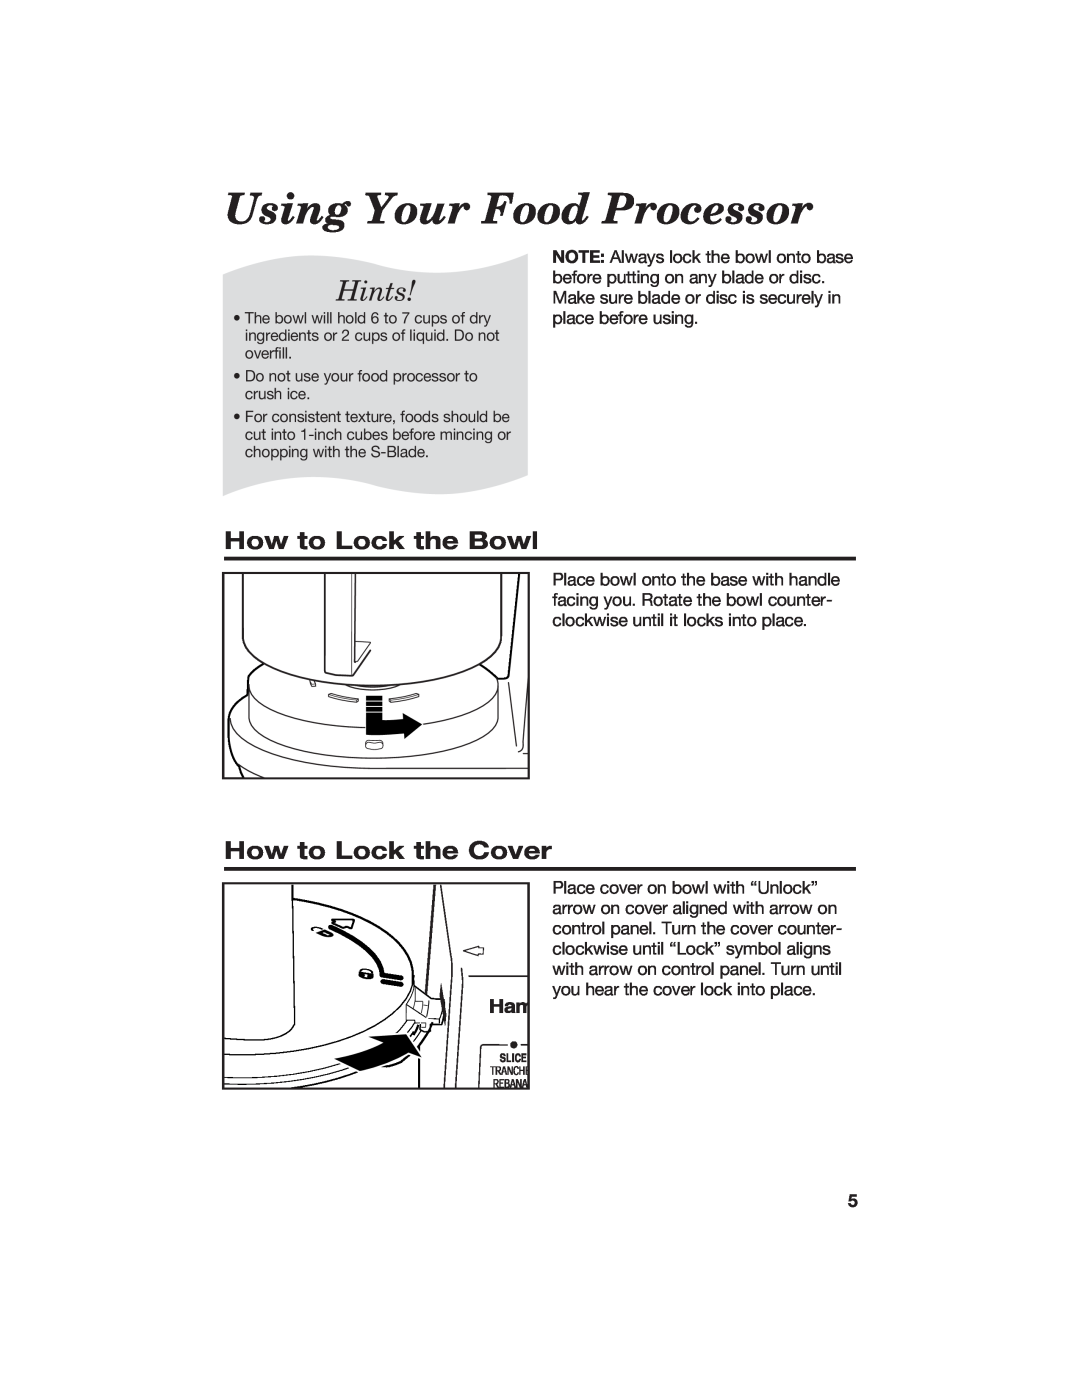 Hamilton Beach 840067300 manual Using Your Food Processor, How to Lock the Bowl, How to Lock the Cover, Hints 